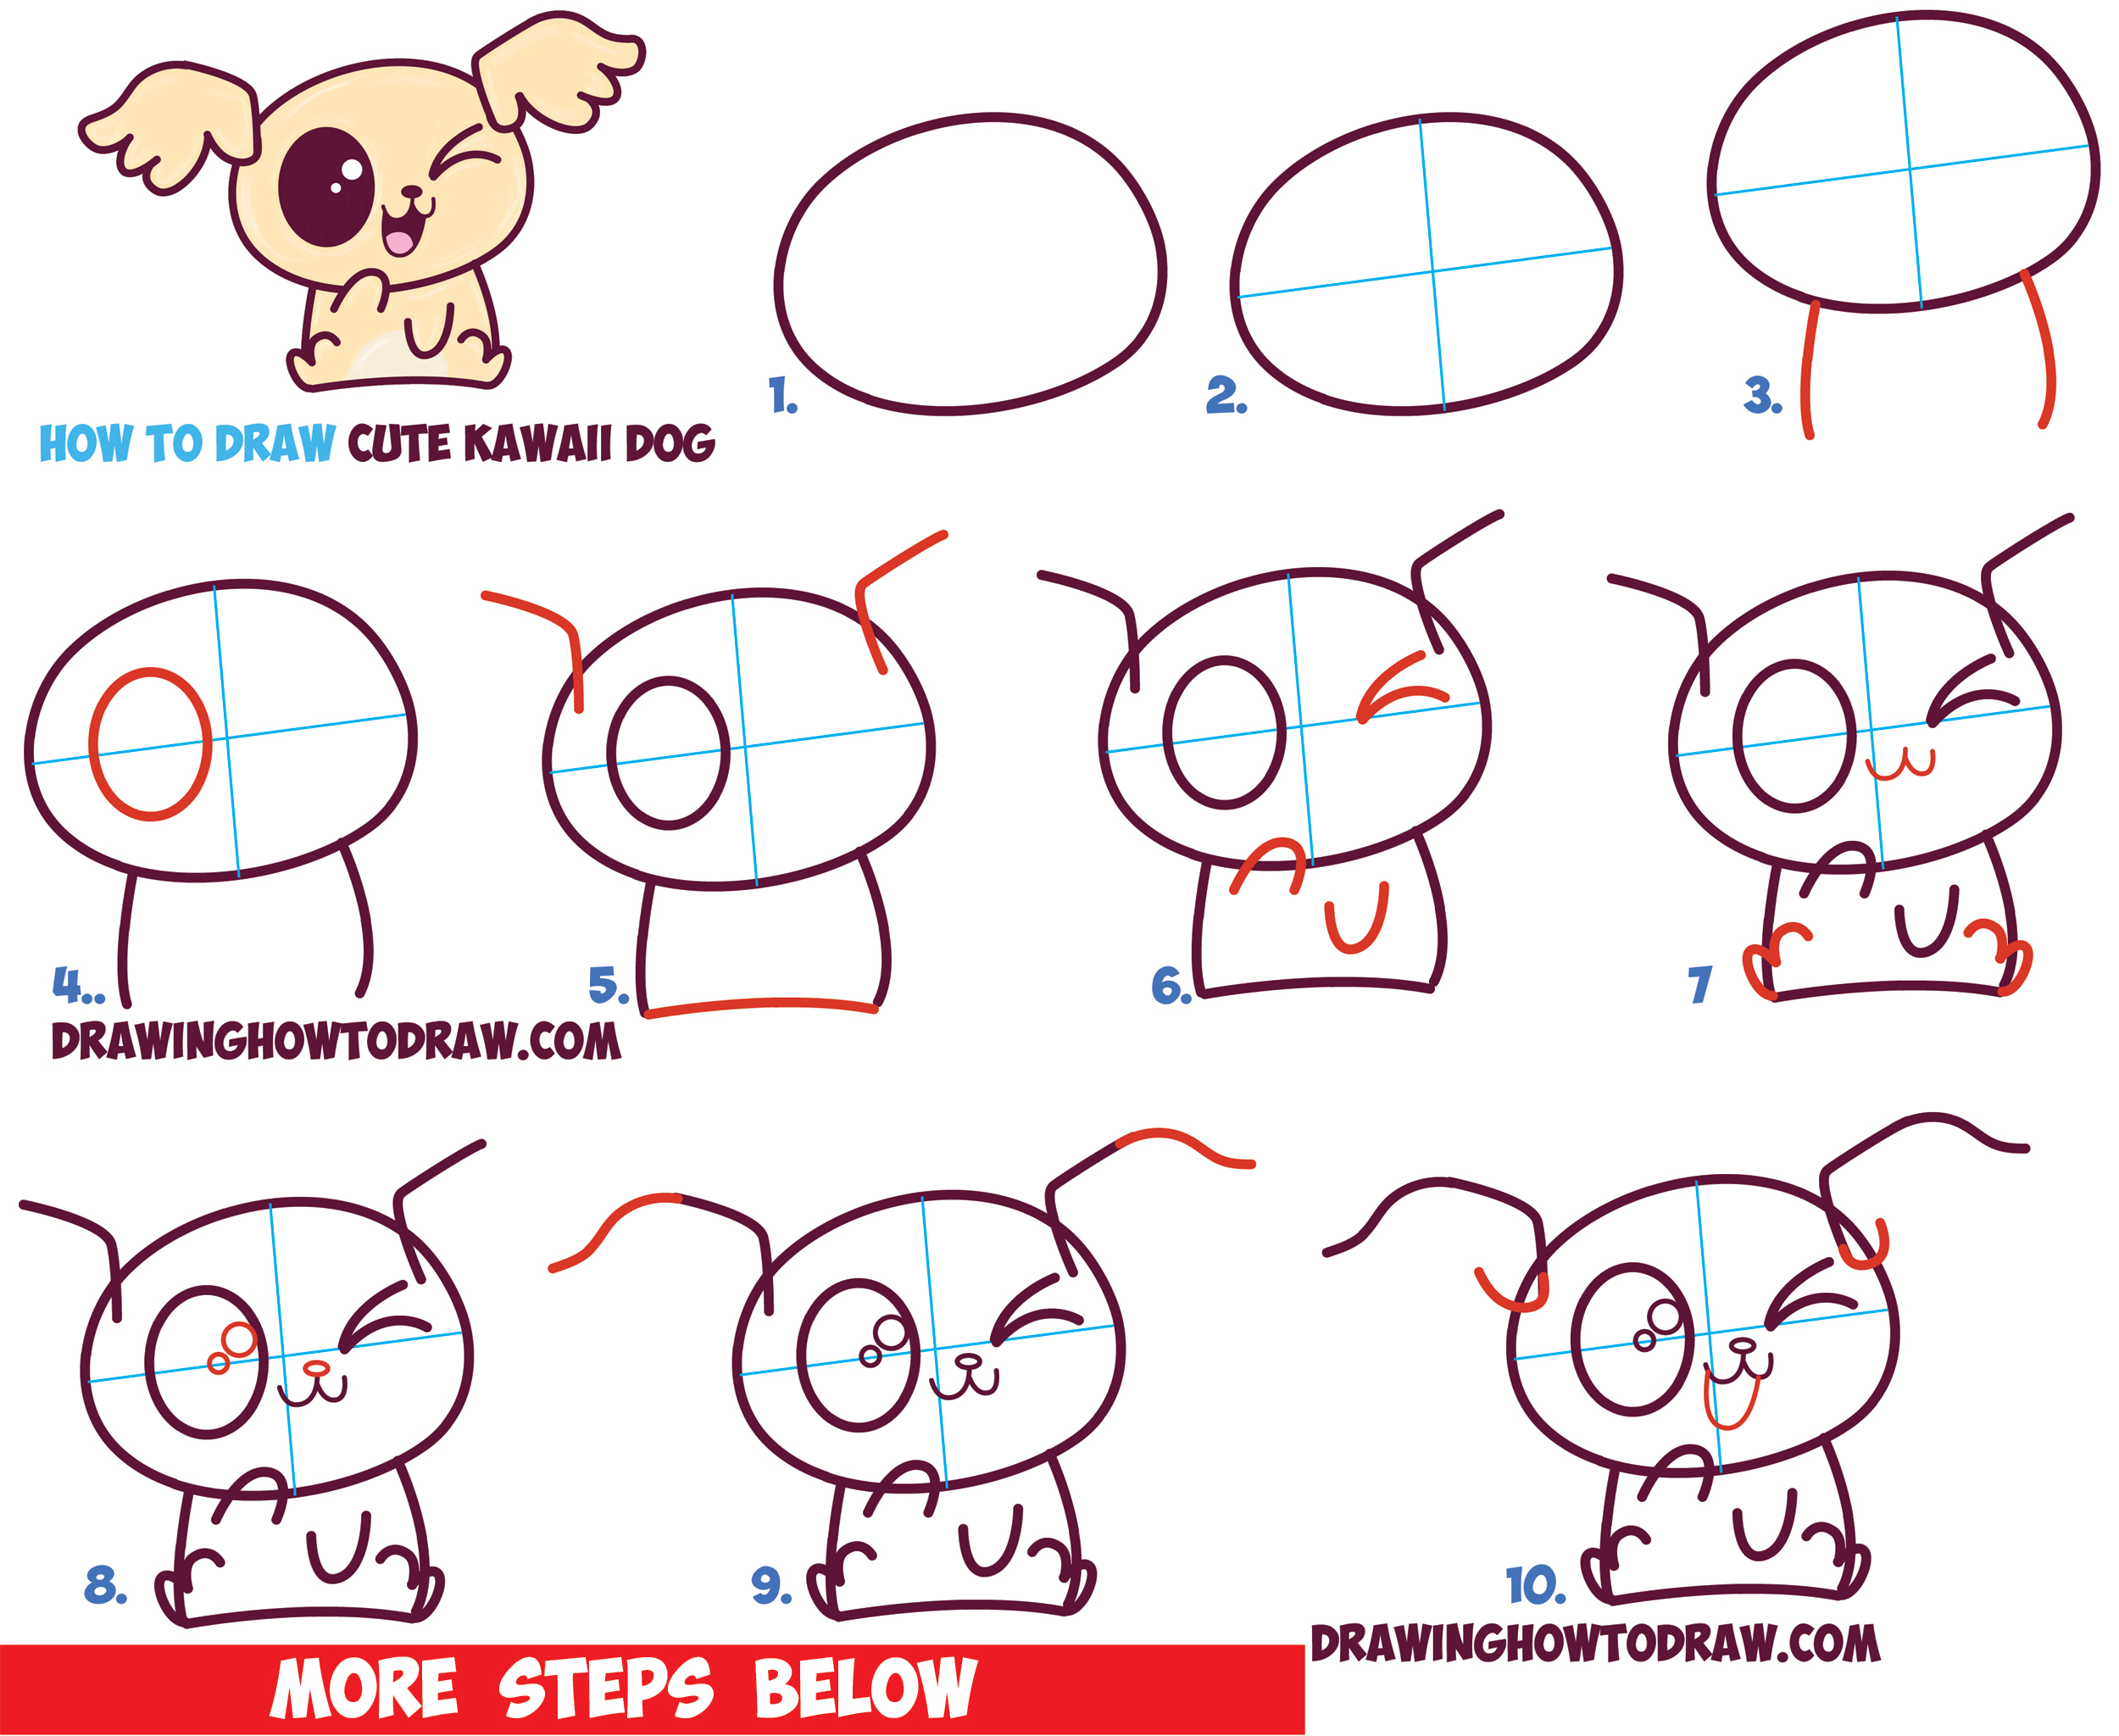 How To Draw A Cute Baby Dog Step By Step picsmidgen